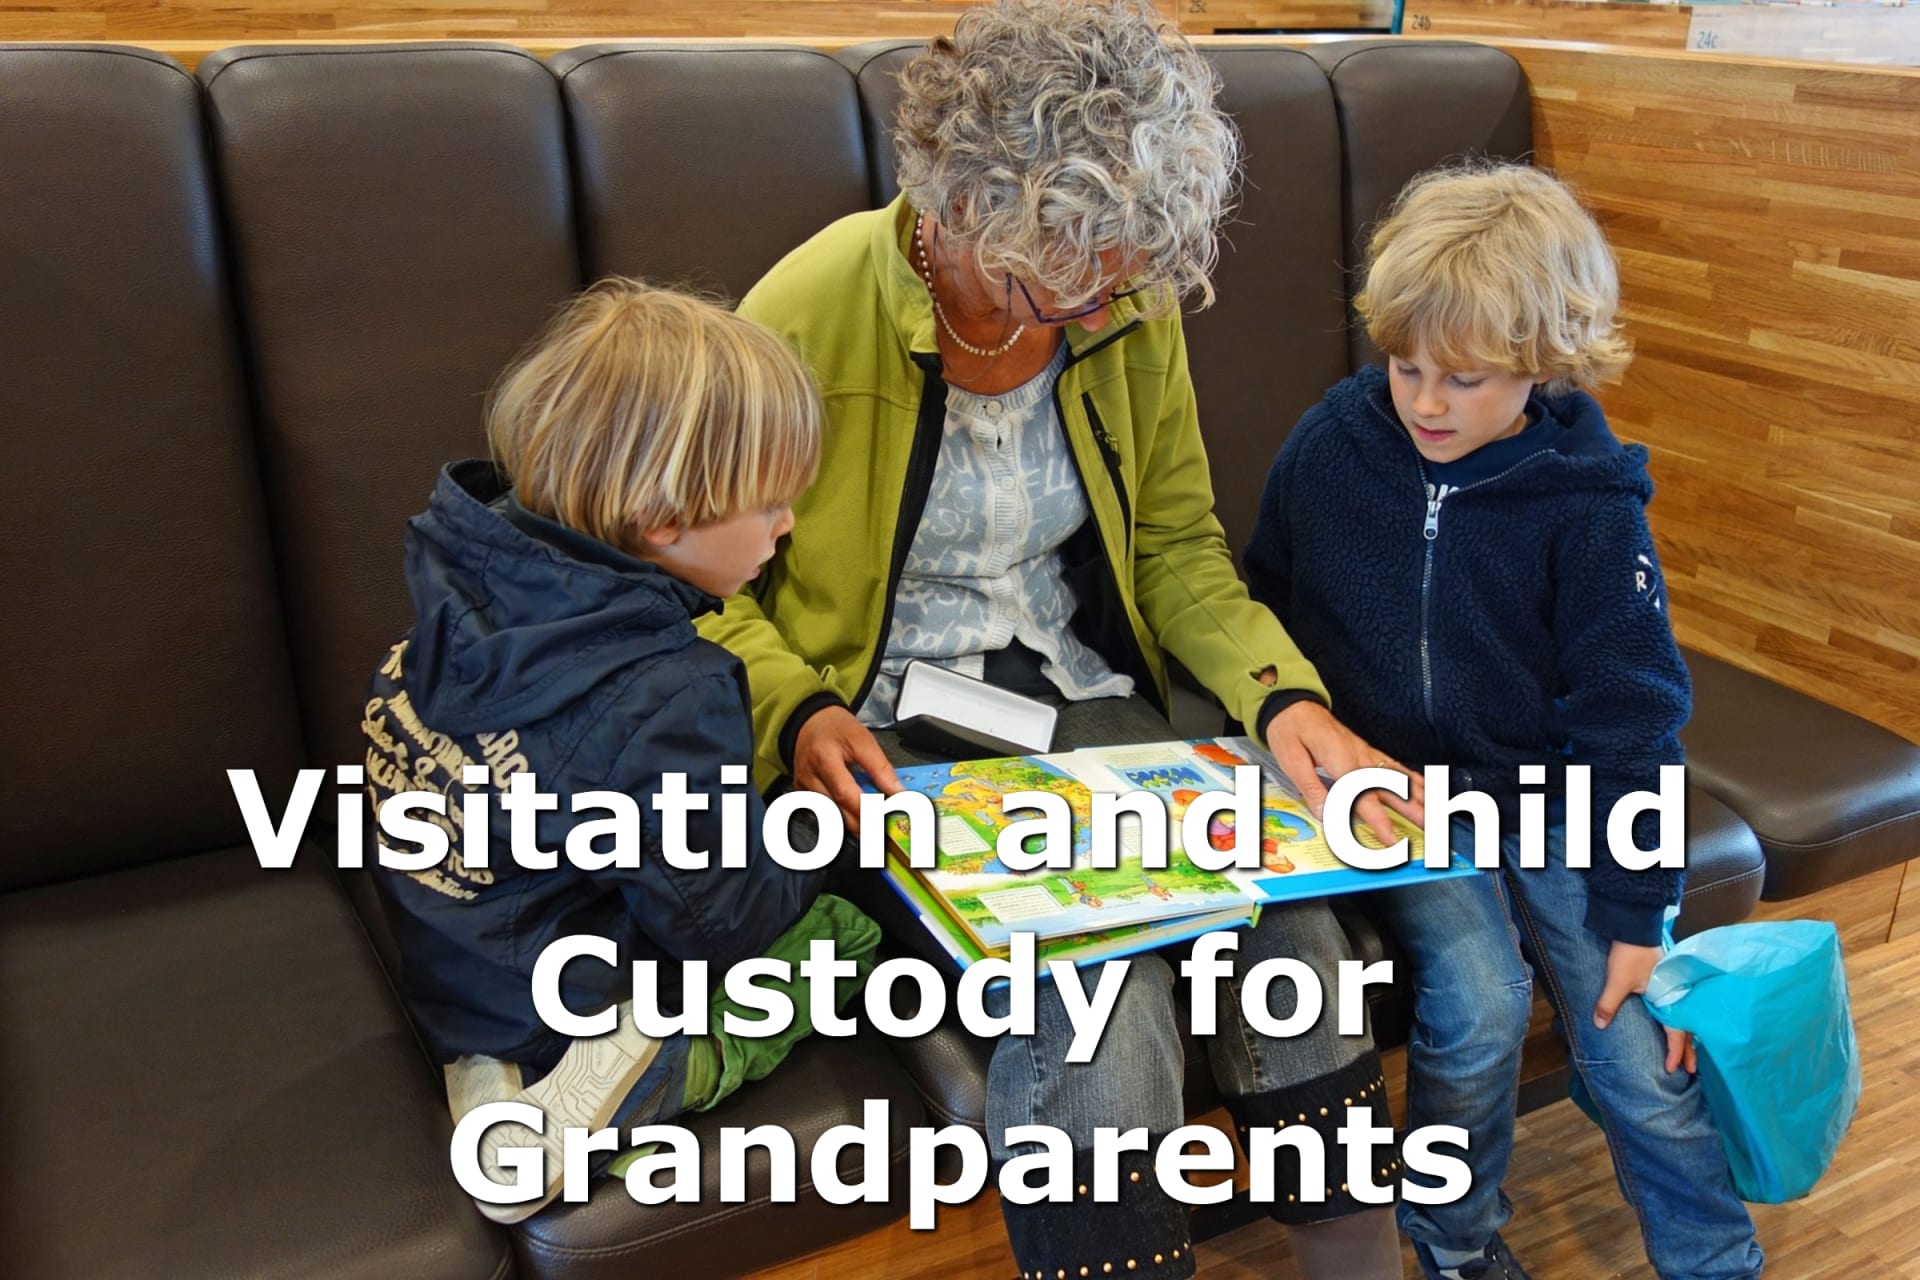 Child Custody Laws in Texas for Grandparents